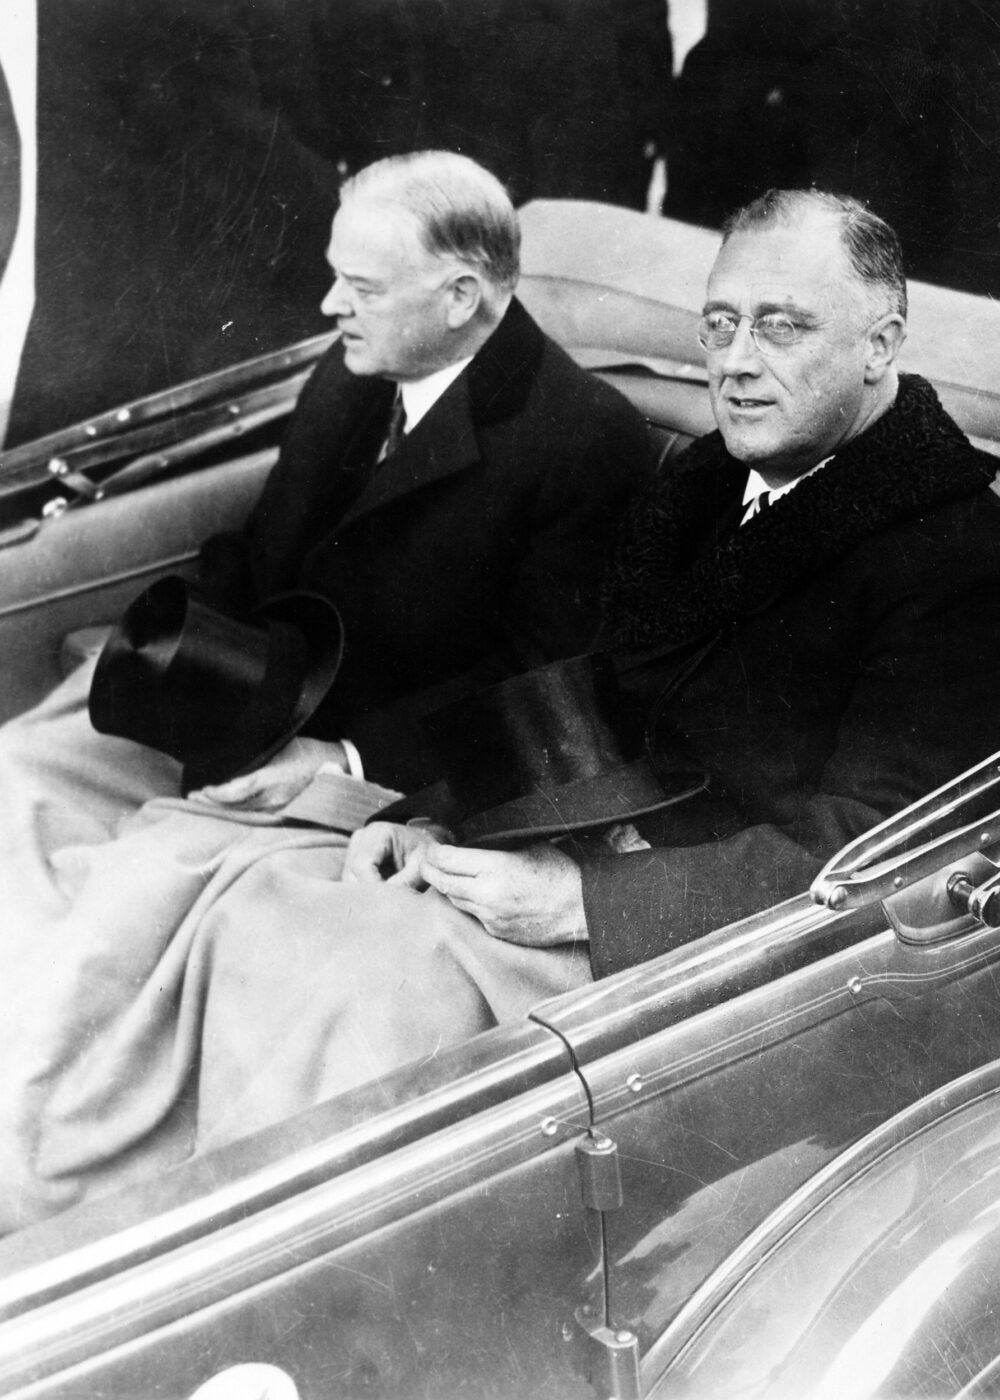 Franklin Delano Roosevelt and Herbert Hoover in convertible automobile on way to U.S. Capitol for Roosevelt's inauguration, March 4, 1933